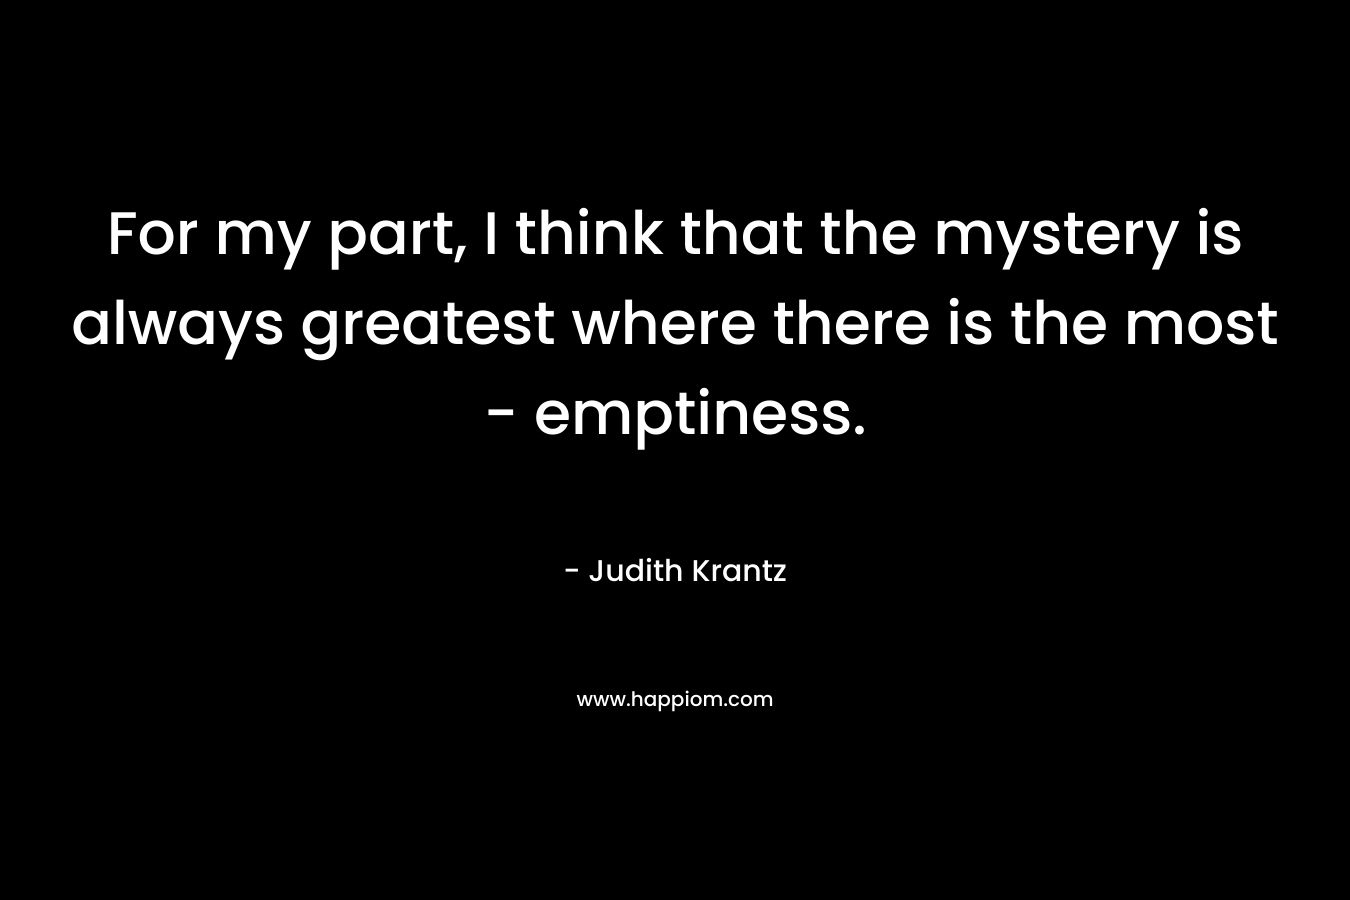 For my part, I think that the mystery is always greatest where there is the most - emptiness.